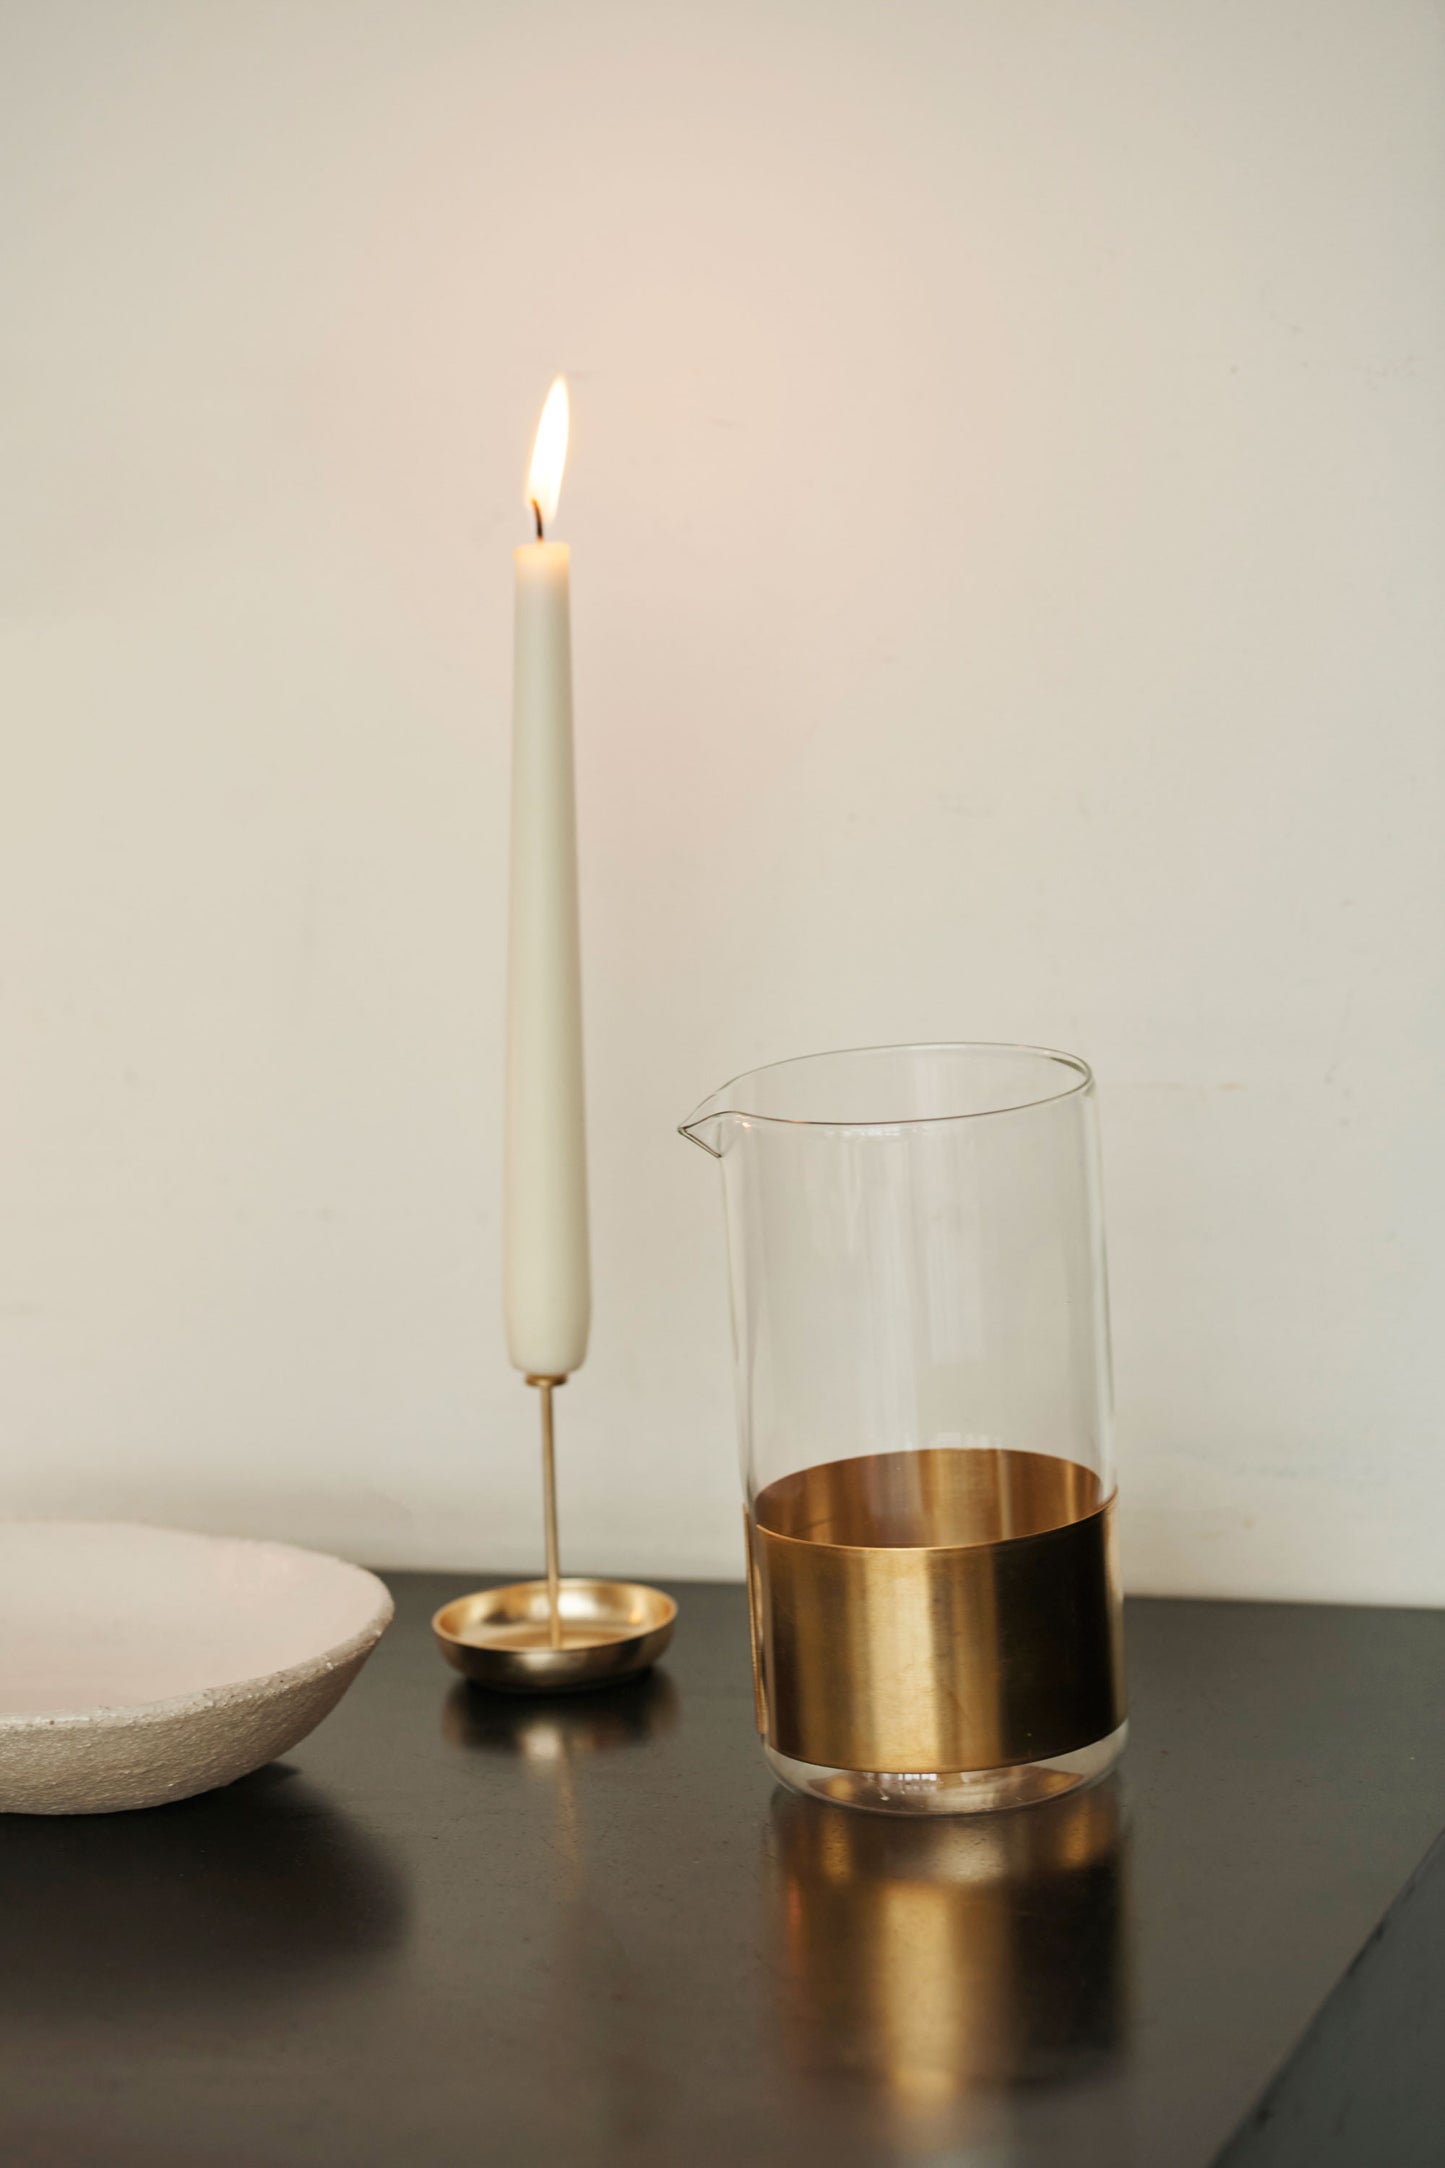 Serax Copper Alchemy Carafe, with lit candle in copper pin holder.